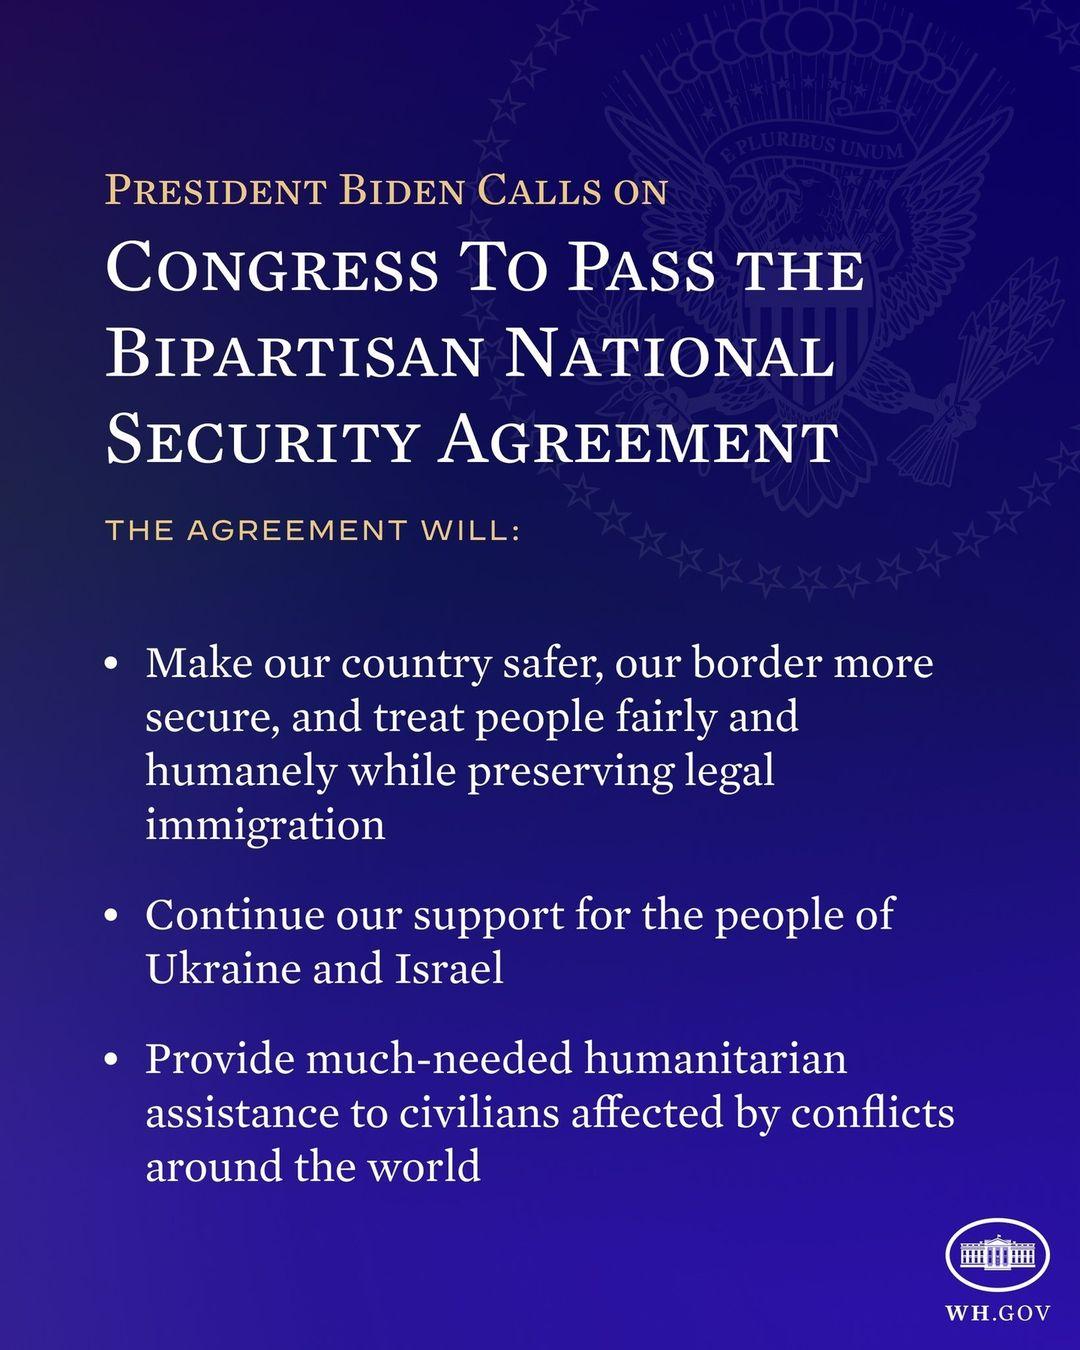 President Biden calls on Congress to immediately pass the bipartisan national security agreement so he can sign it into law.